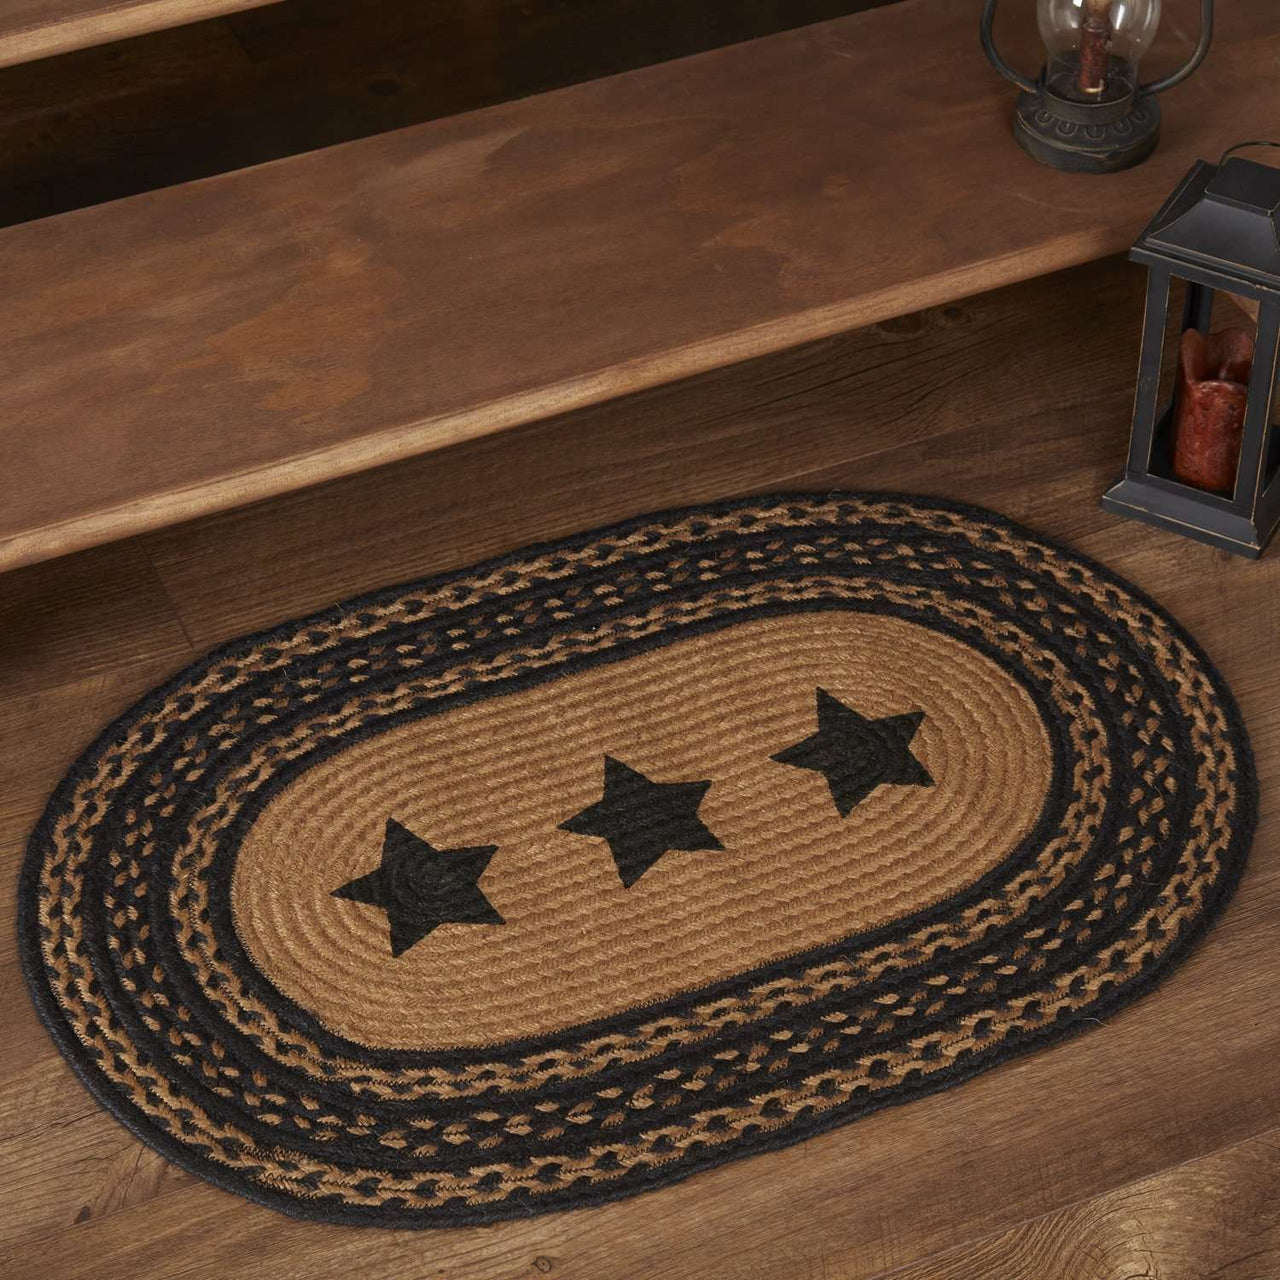 Farmhouse Jute Braided Rugs Oval Stencil Stars VHC Brands Rugs VHC Brands 